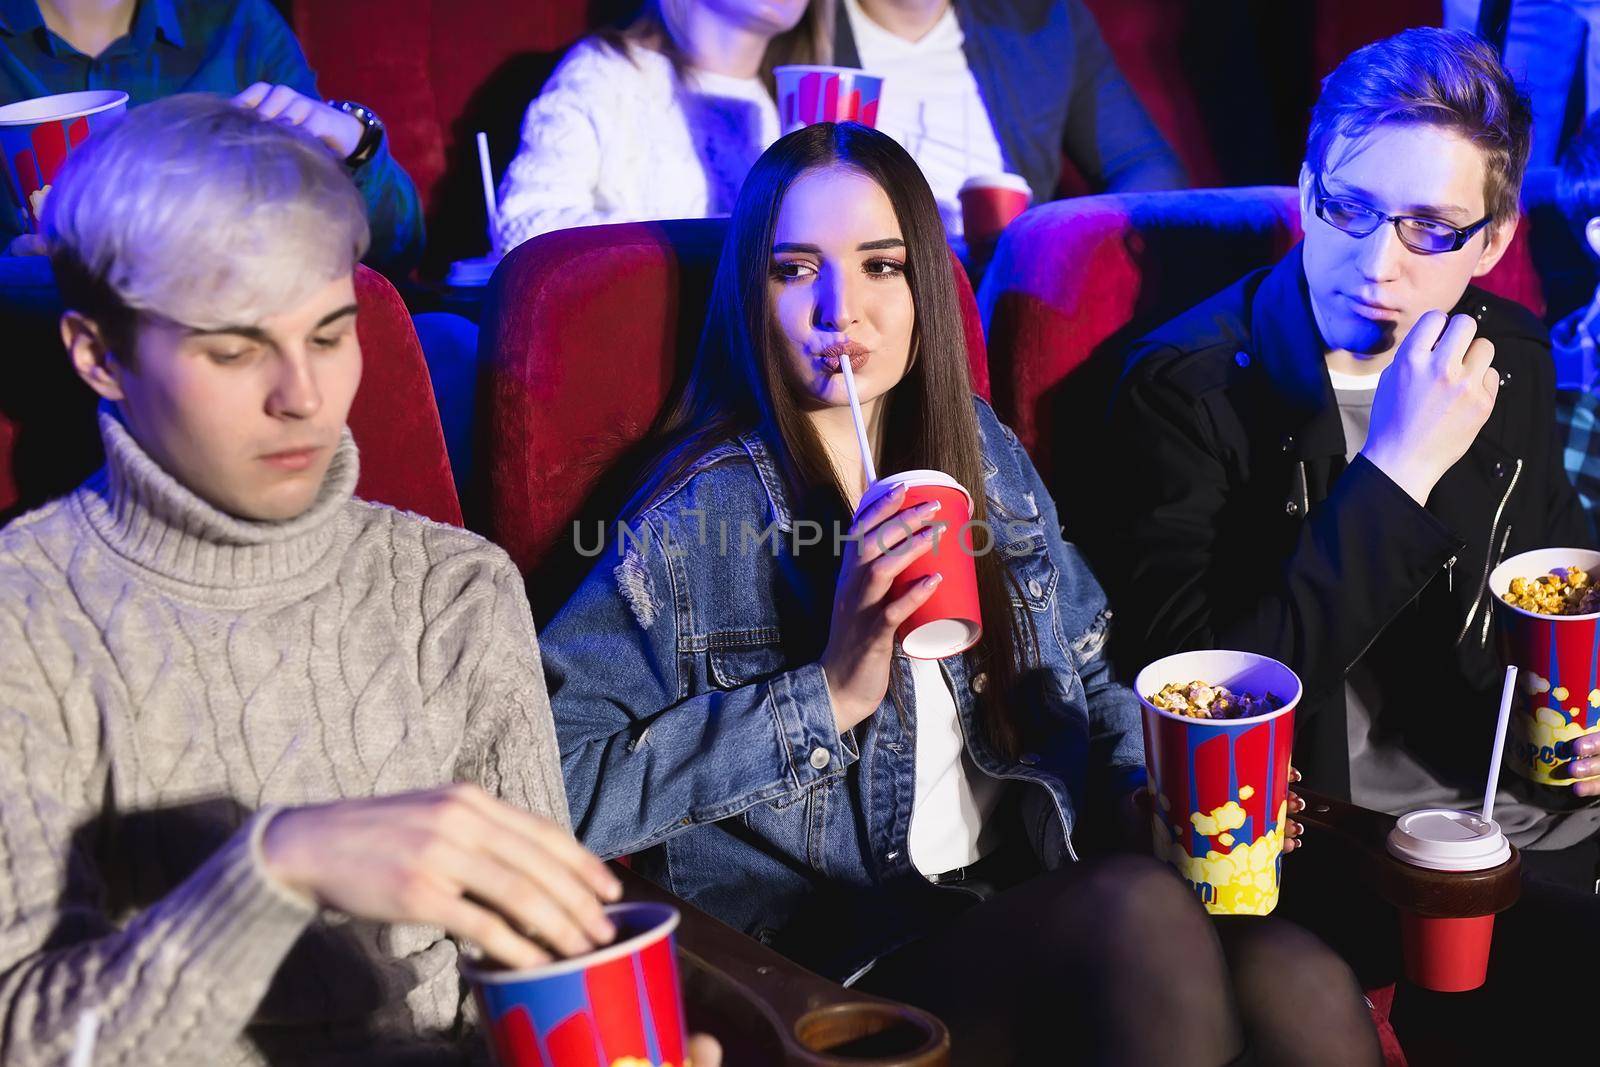 Cheerful company in the cinema. A girl drinks from a glass, a man eats popcorn.